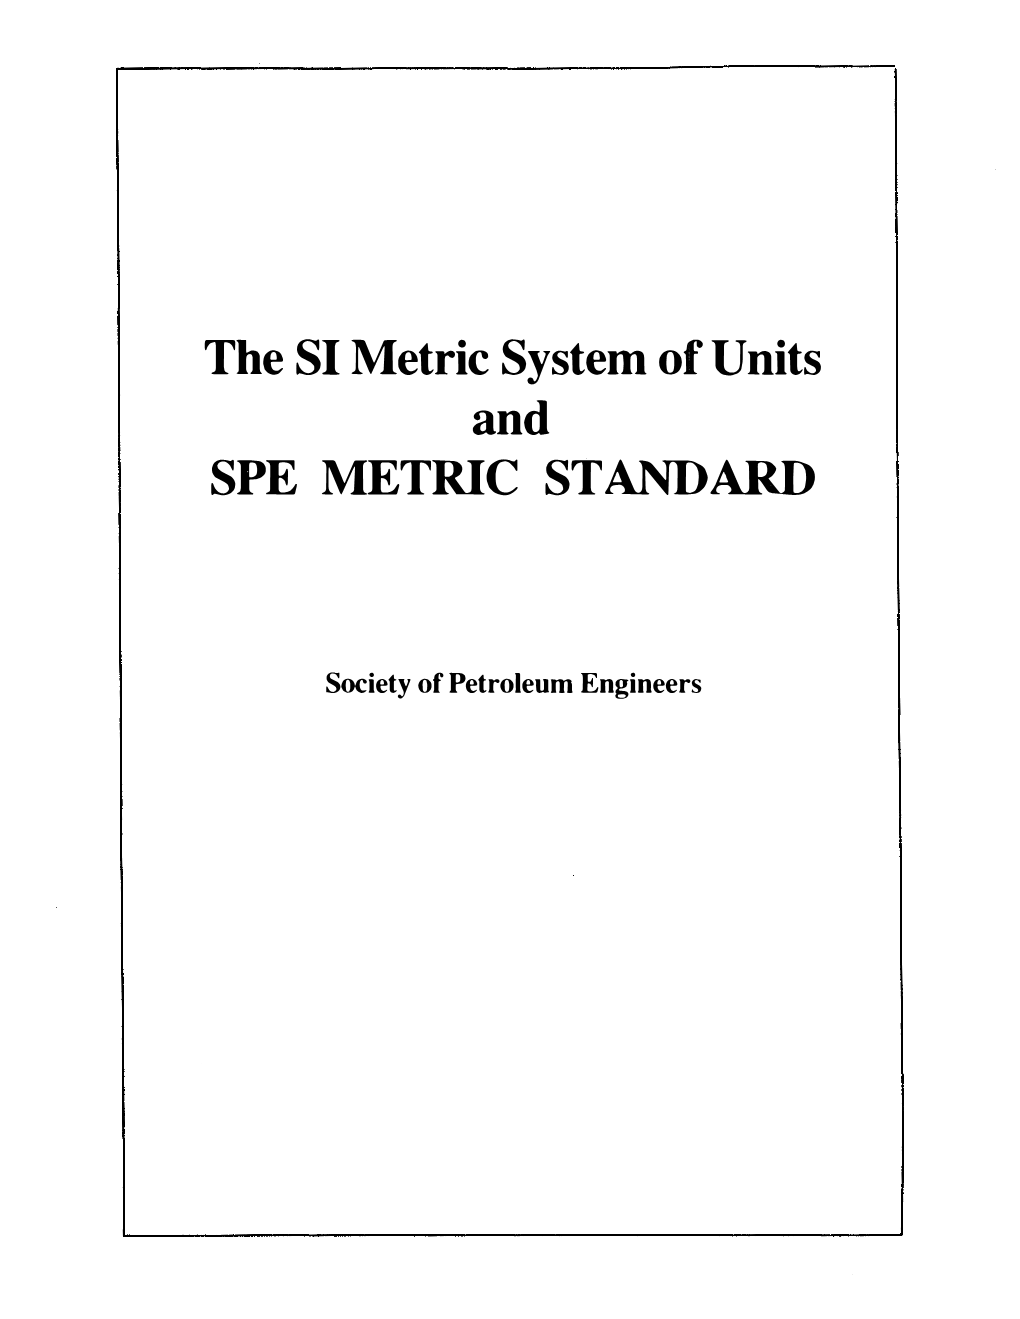 The SI Metric Systeld of Units and SPE METRIC STANDARD